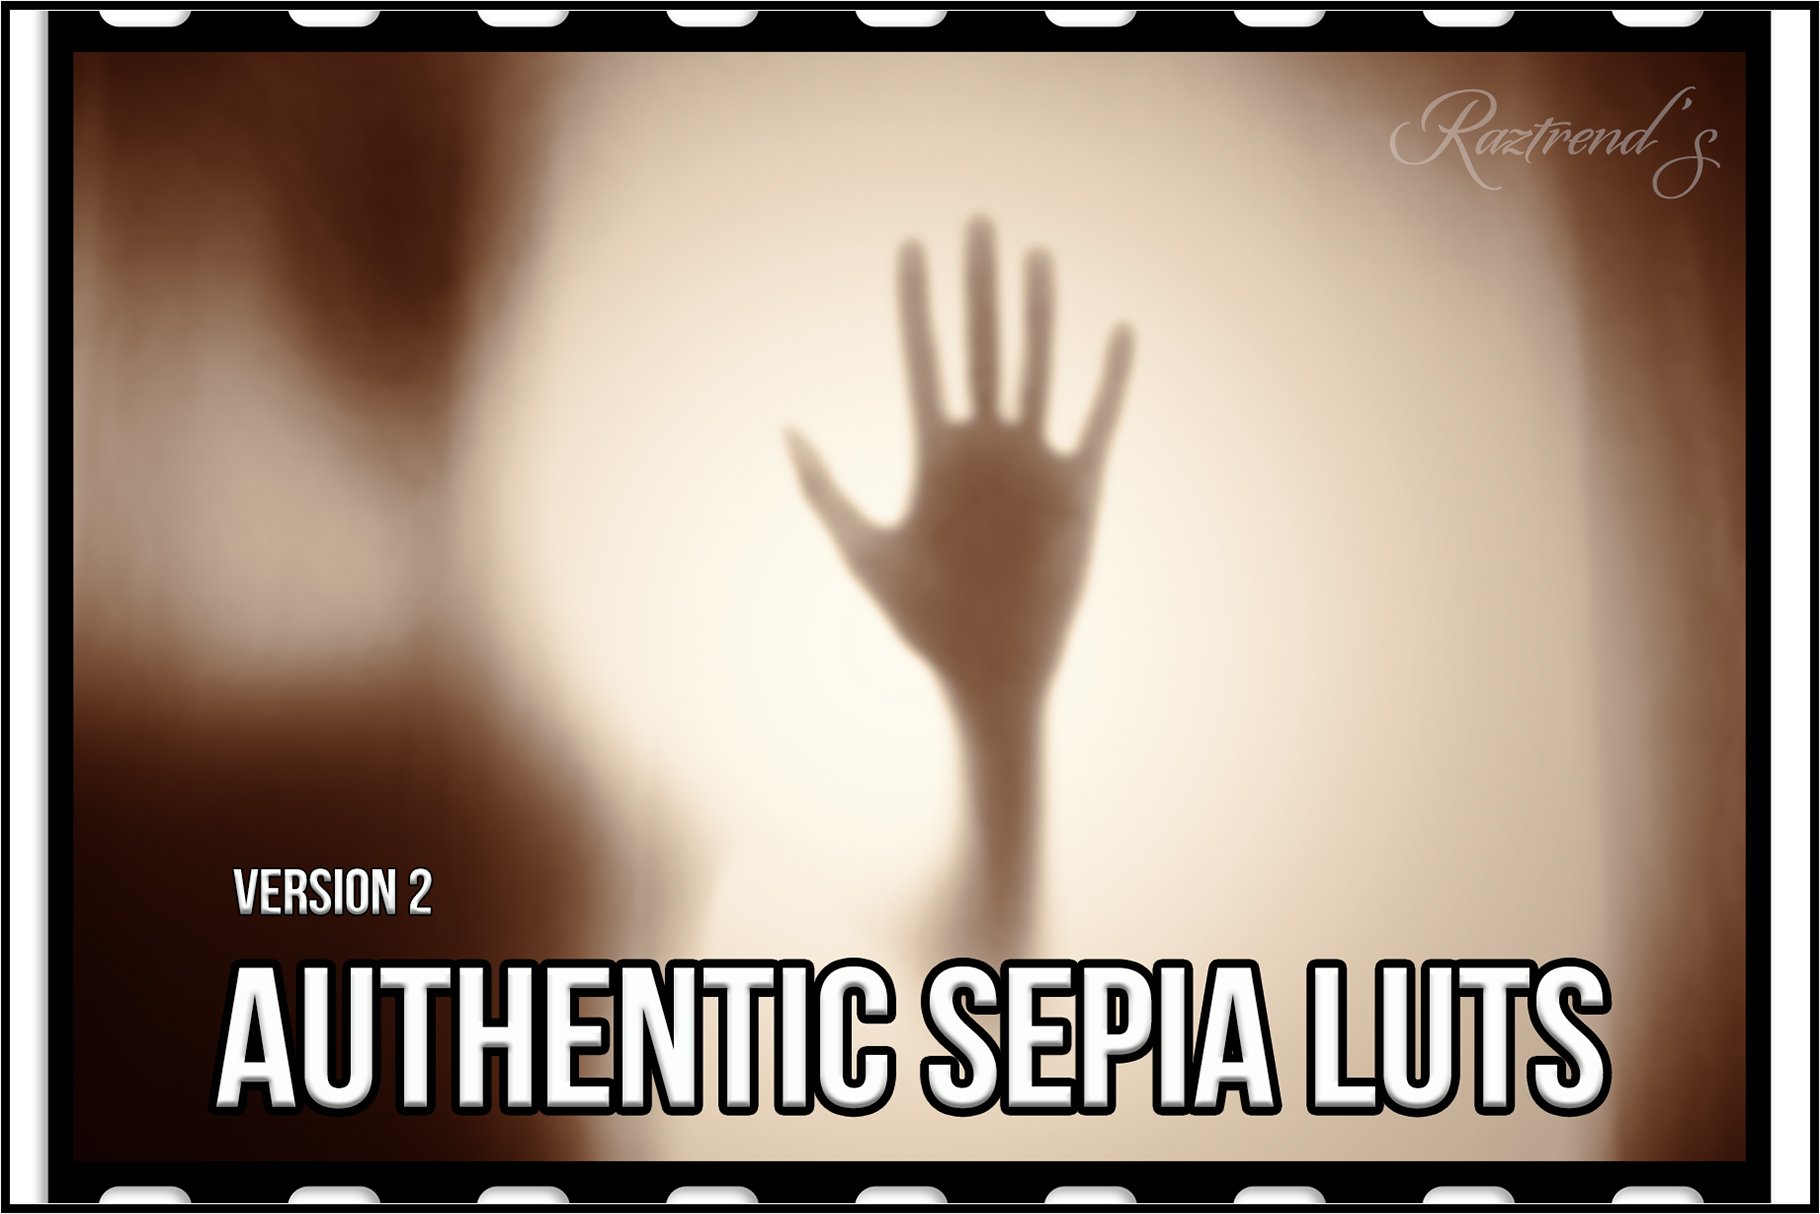 Authentic Sepia LUTs - Version 2cover image.